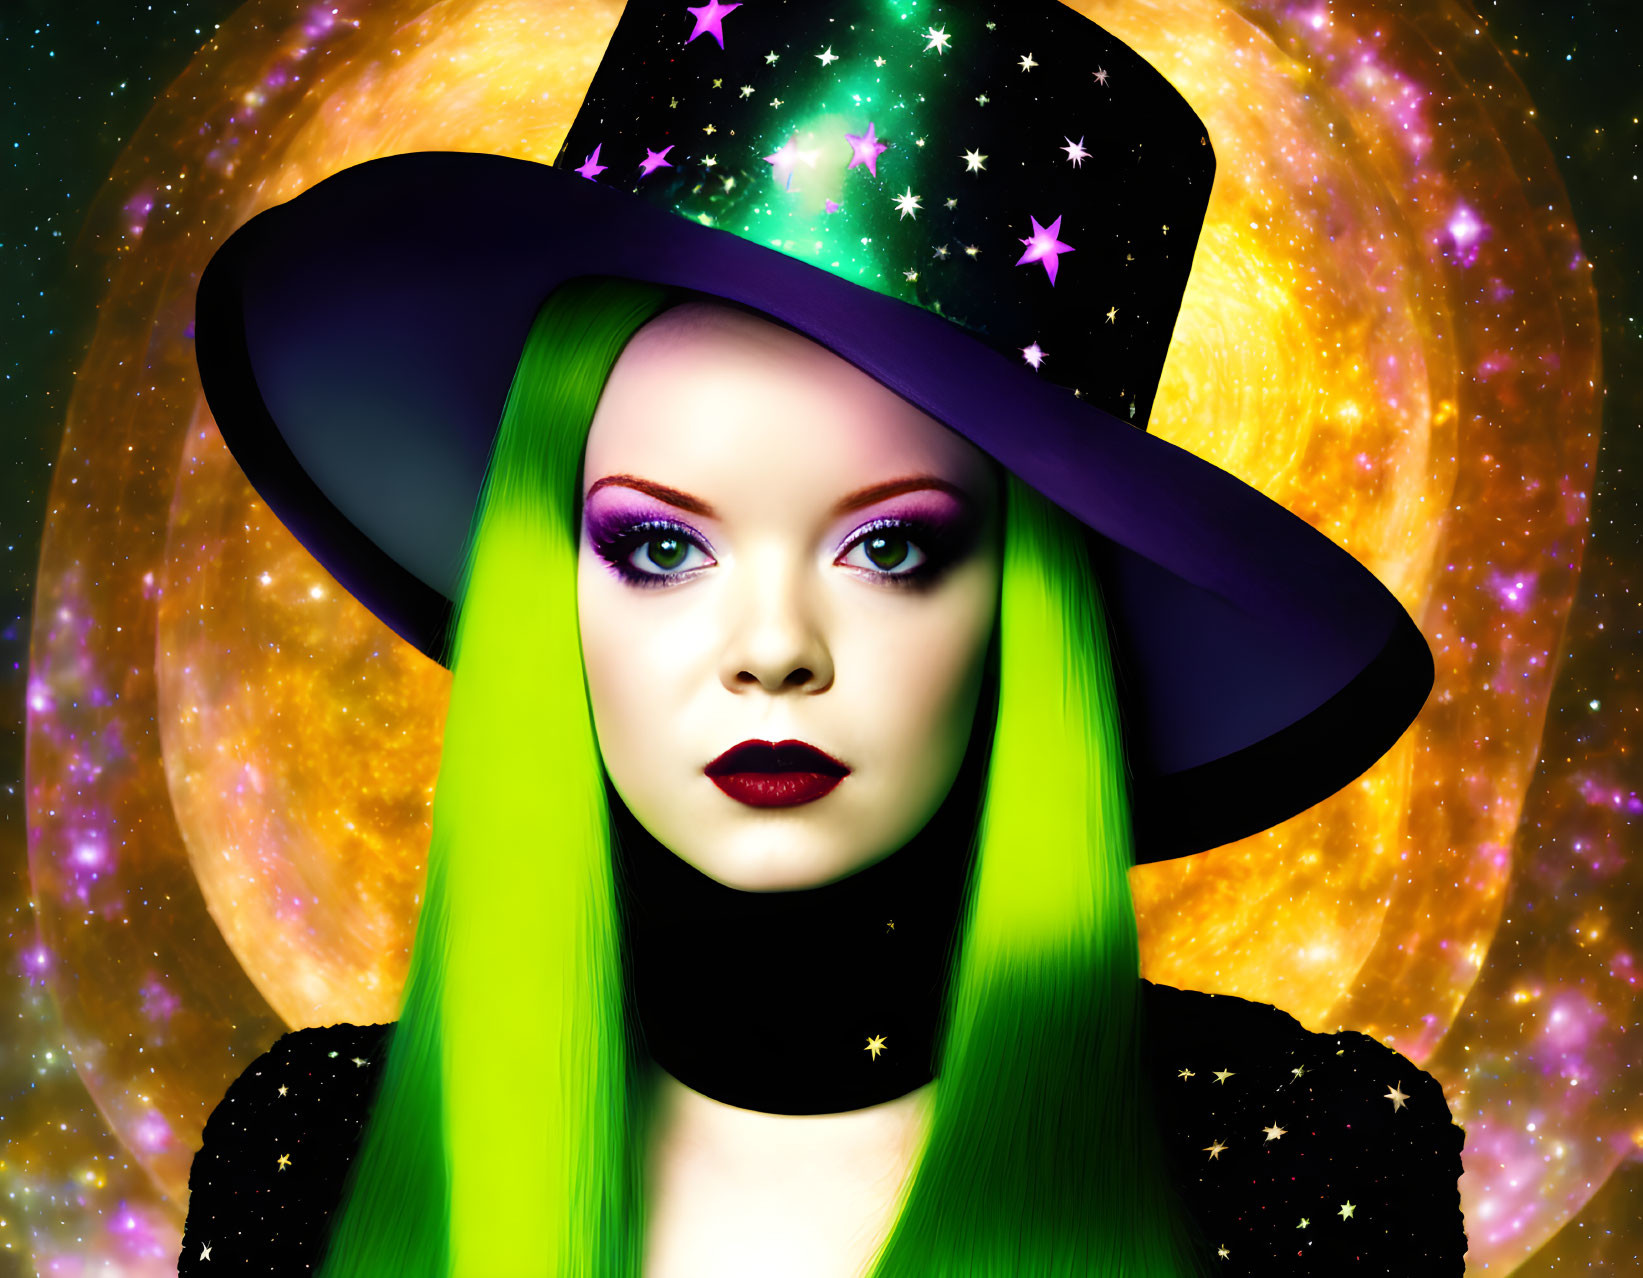 Bright green hair and starry hat against galaxy backdrop